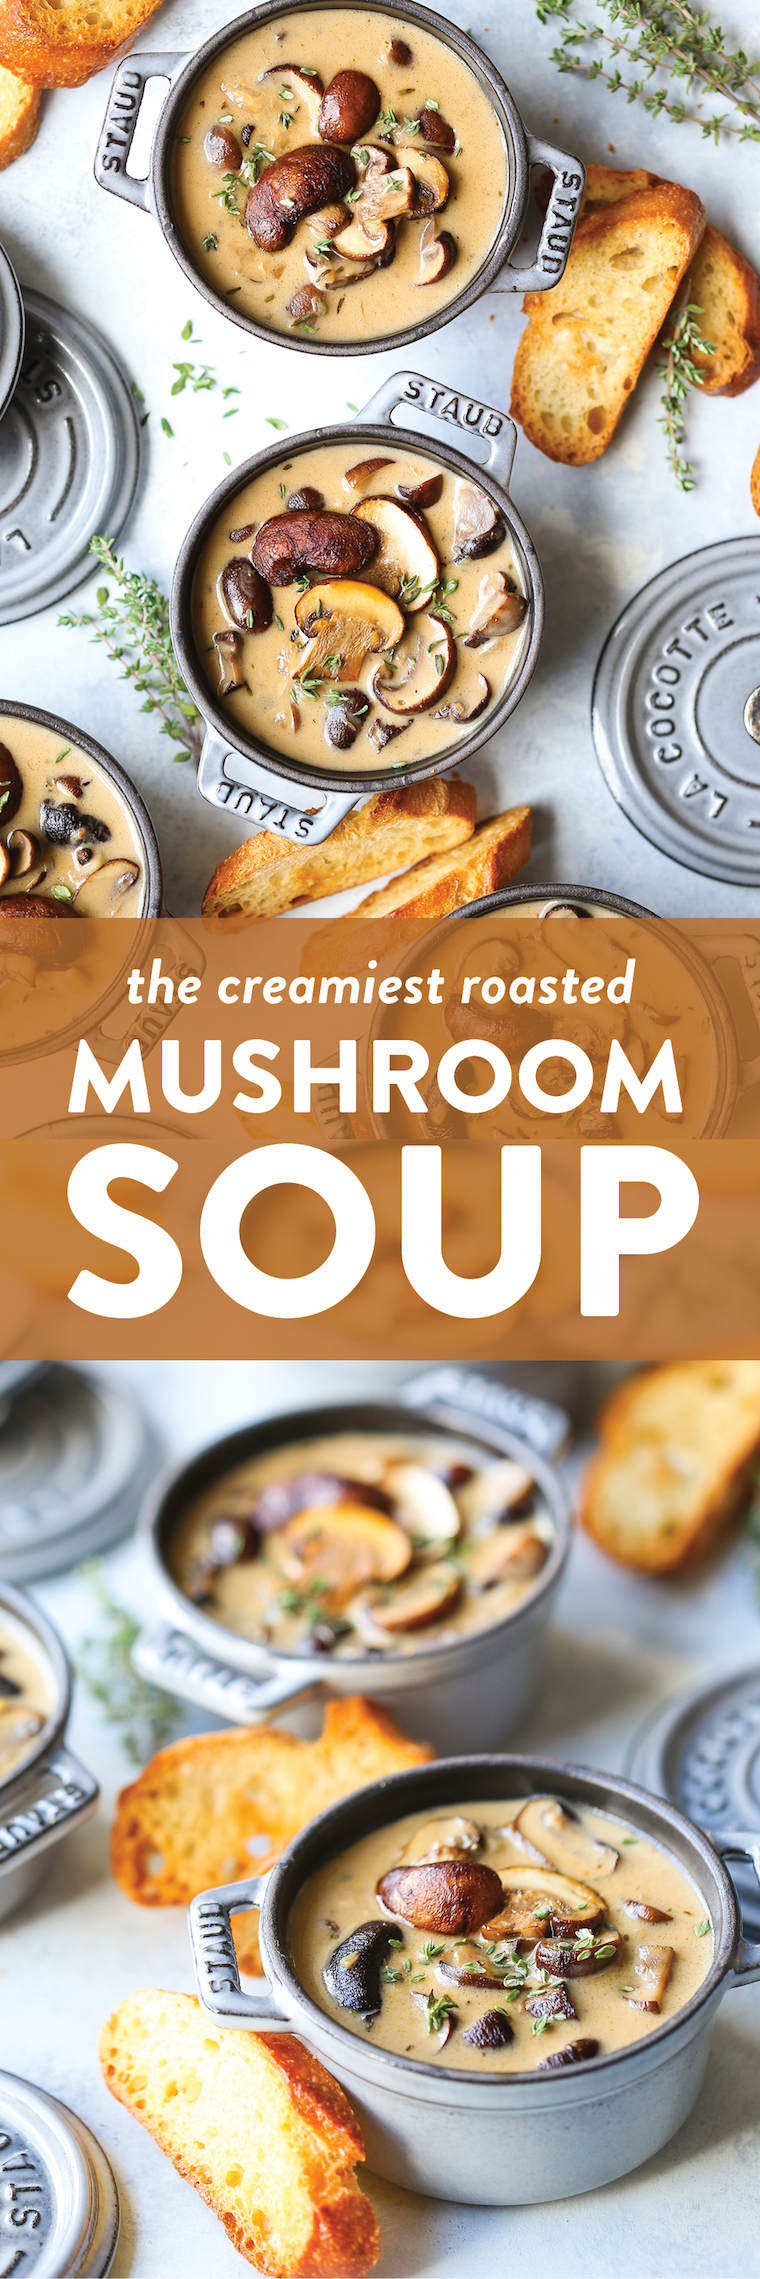 Creamy Roasted Mushroom Soup - So creamy, rich, hearty and comforting! The secret to this soup is roasting the mushrooms in garlic and fresh thyme first!